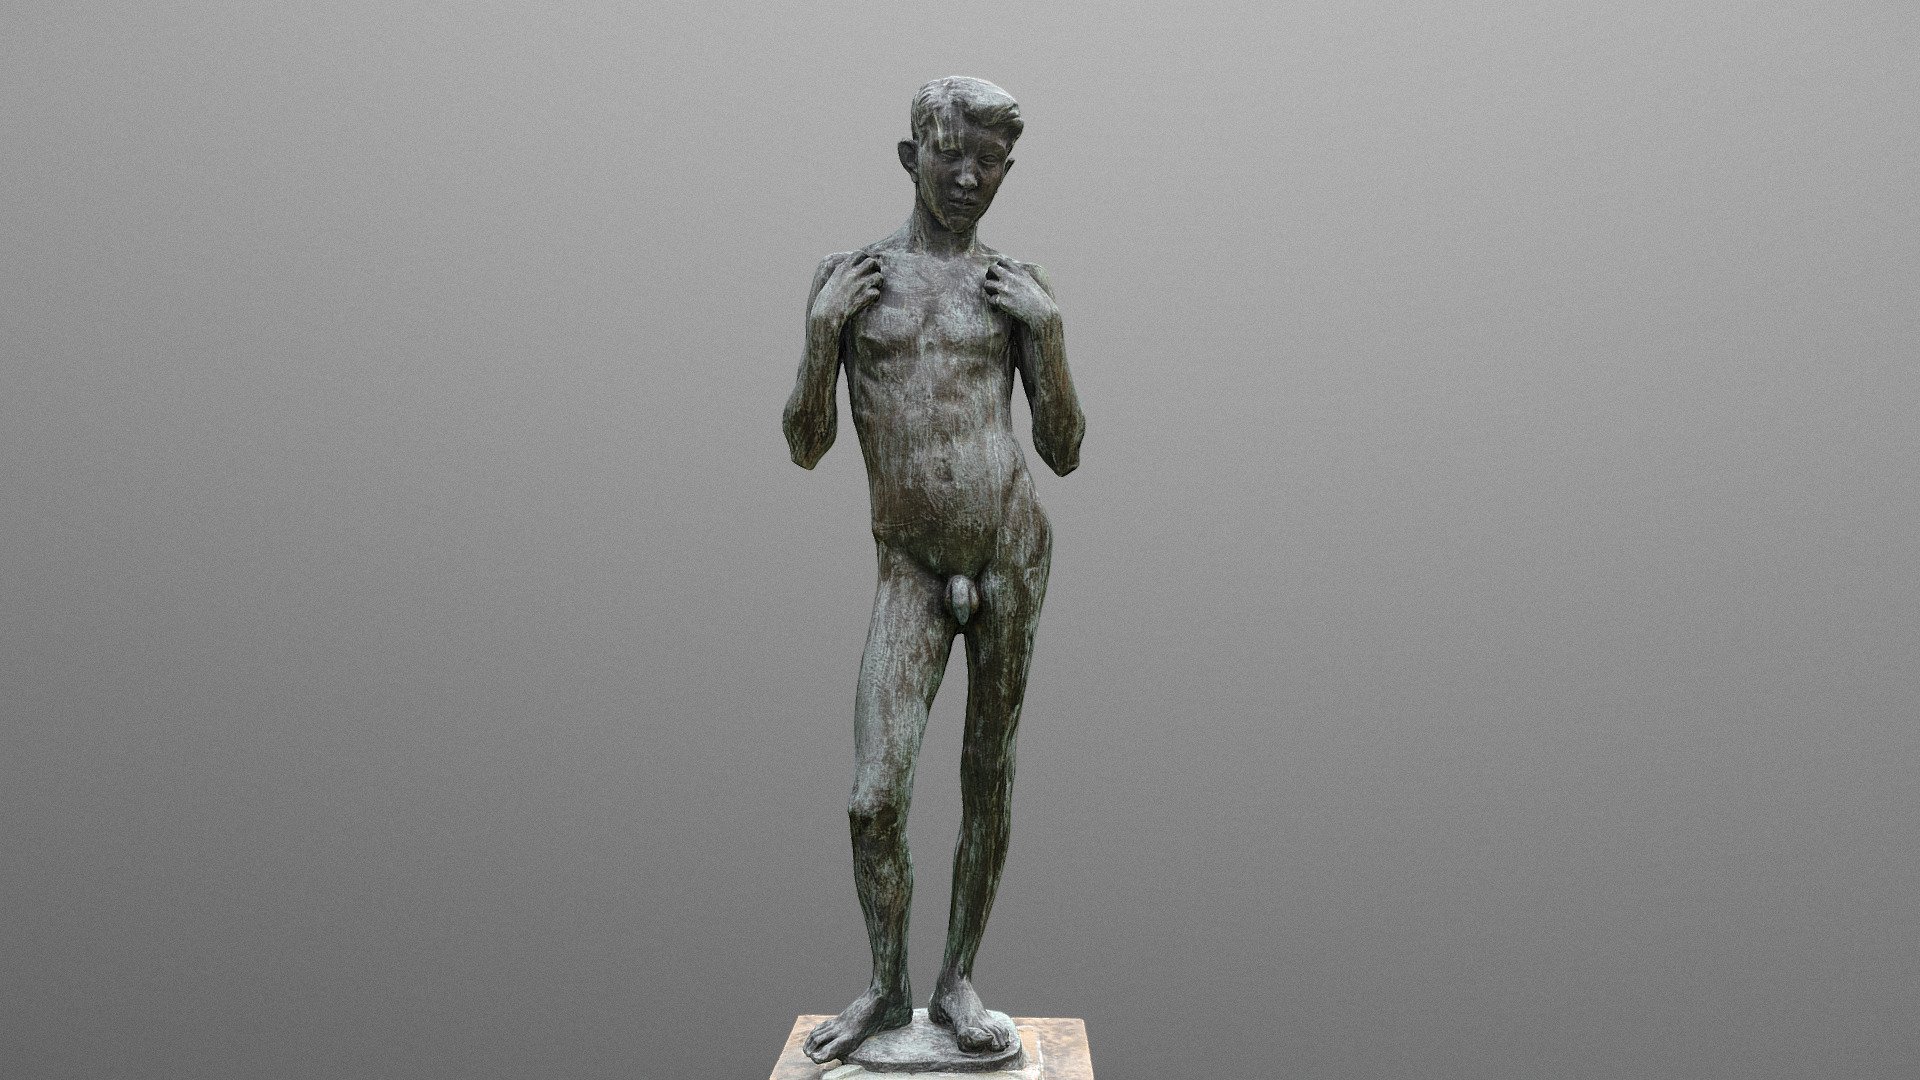 The Standing boy public space installation statue sculpture, weathered bronze

Male boy 16 years old figure standing nude model reference

Artist: Karel Dvořák, 1930 @ public park, Prague, Czechia • https://goo.gl/maps/7ND8QakDQo5uBXoa7 Apr 4 2022

Photogrammetry scan 130x36 MPix

Created in RealityCapture by Capturing Reality - The Standing boy - Download Free 3D model by matousekfoto 3d model